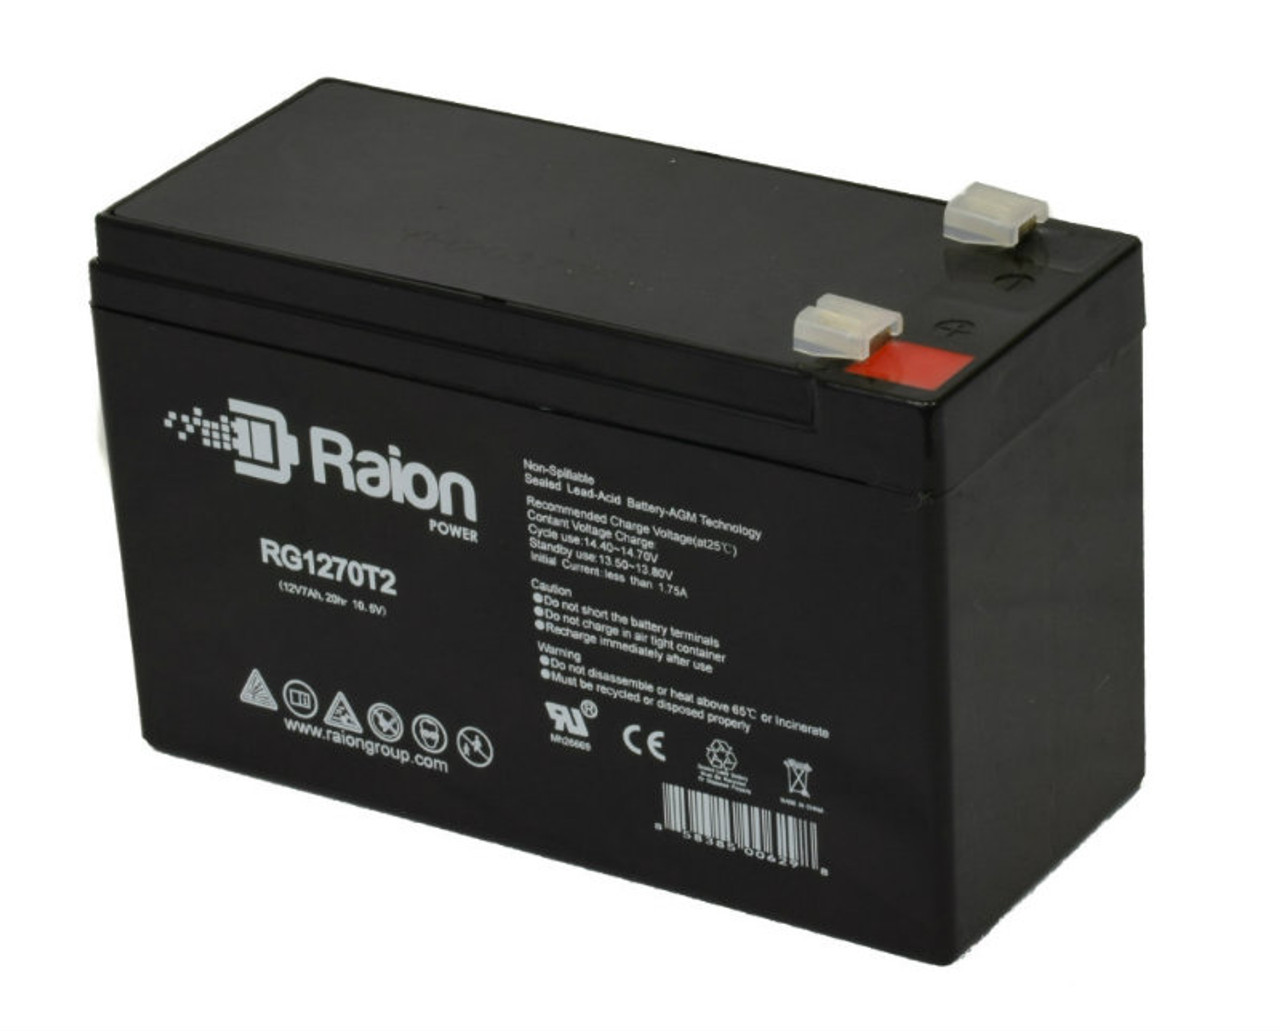 Raion Power RG1270T1 12V 7Ah Non-Spillable Replacement Battery for Amptek AT12-7.6